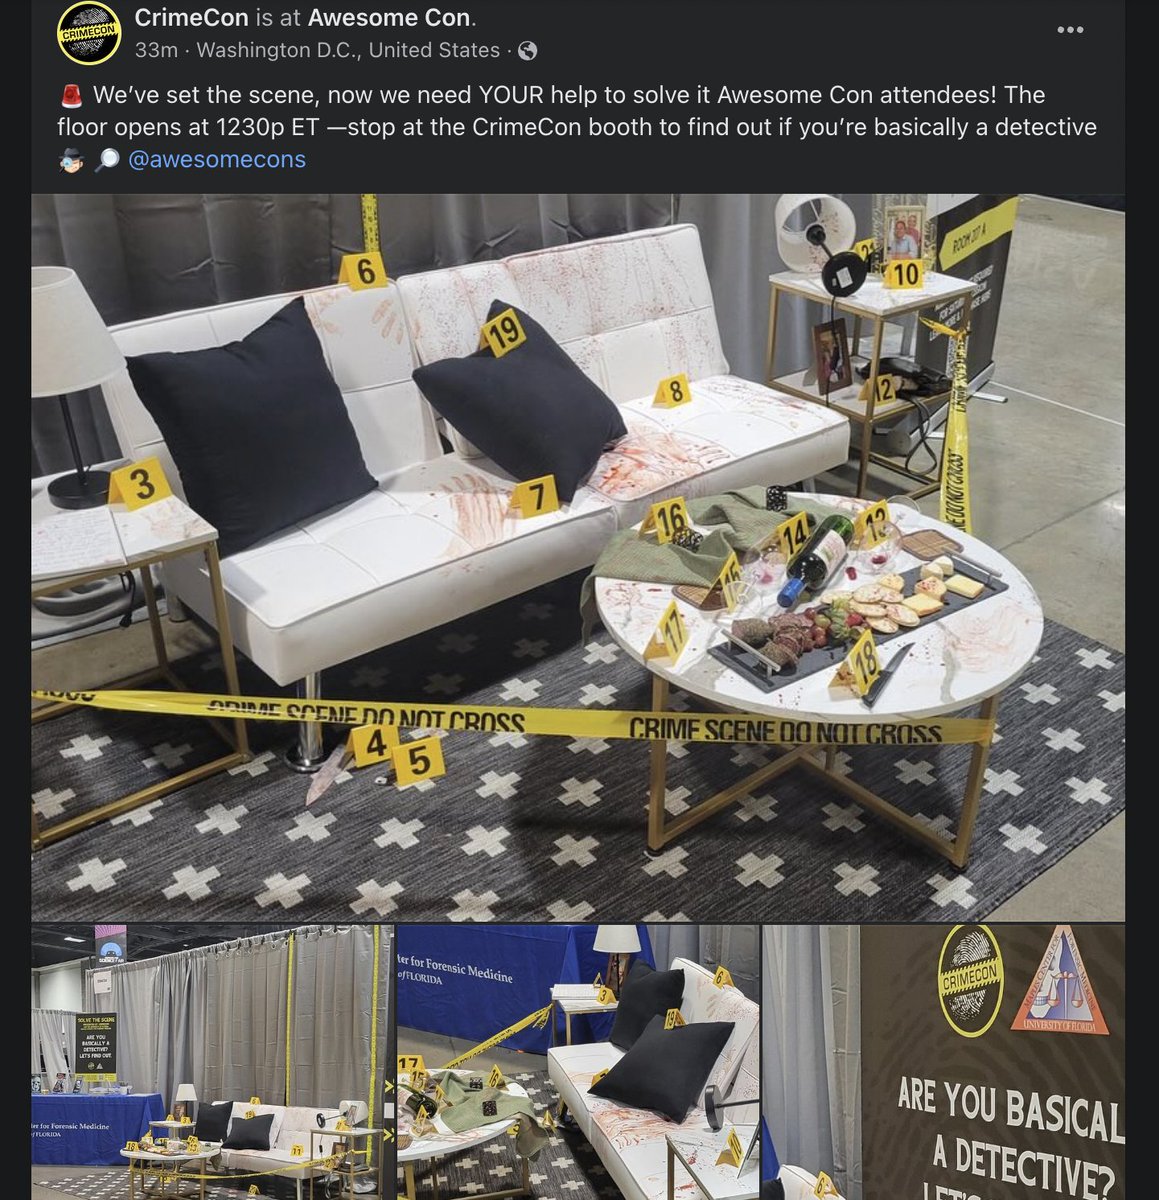 This is absolutely DISGUSTING. Do better @CrimeCon .